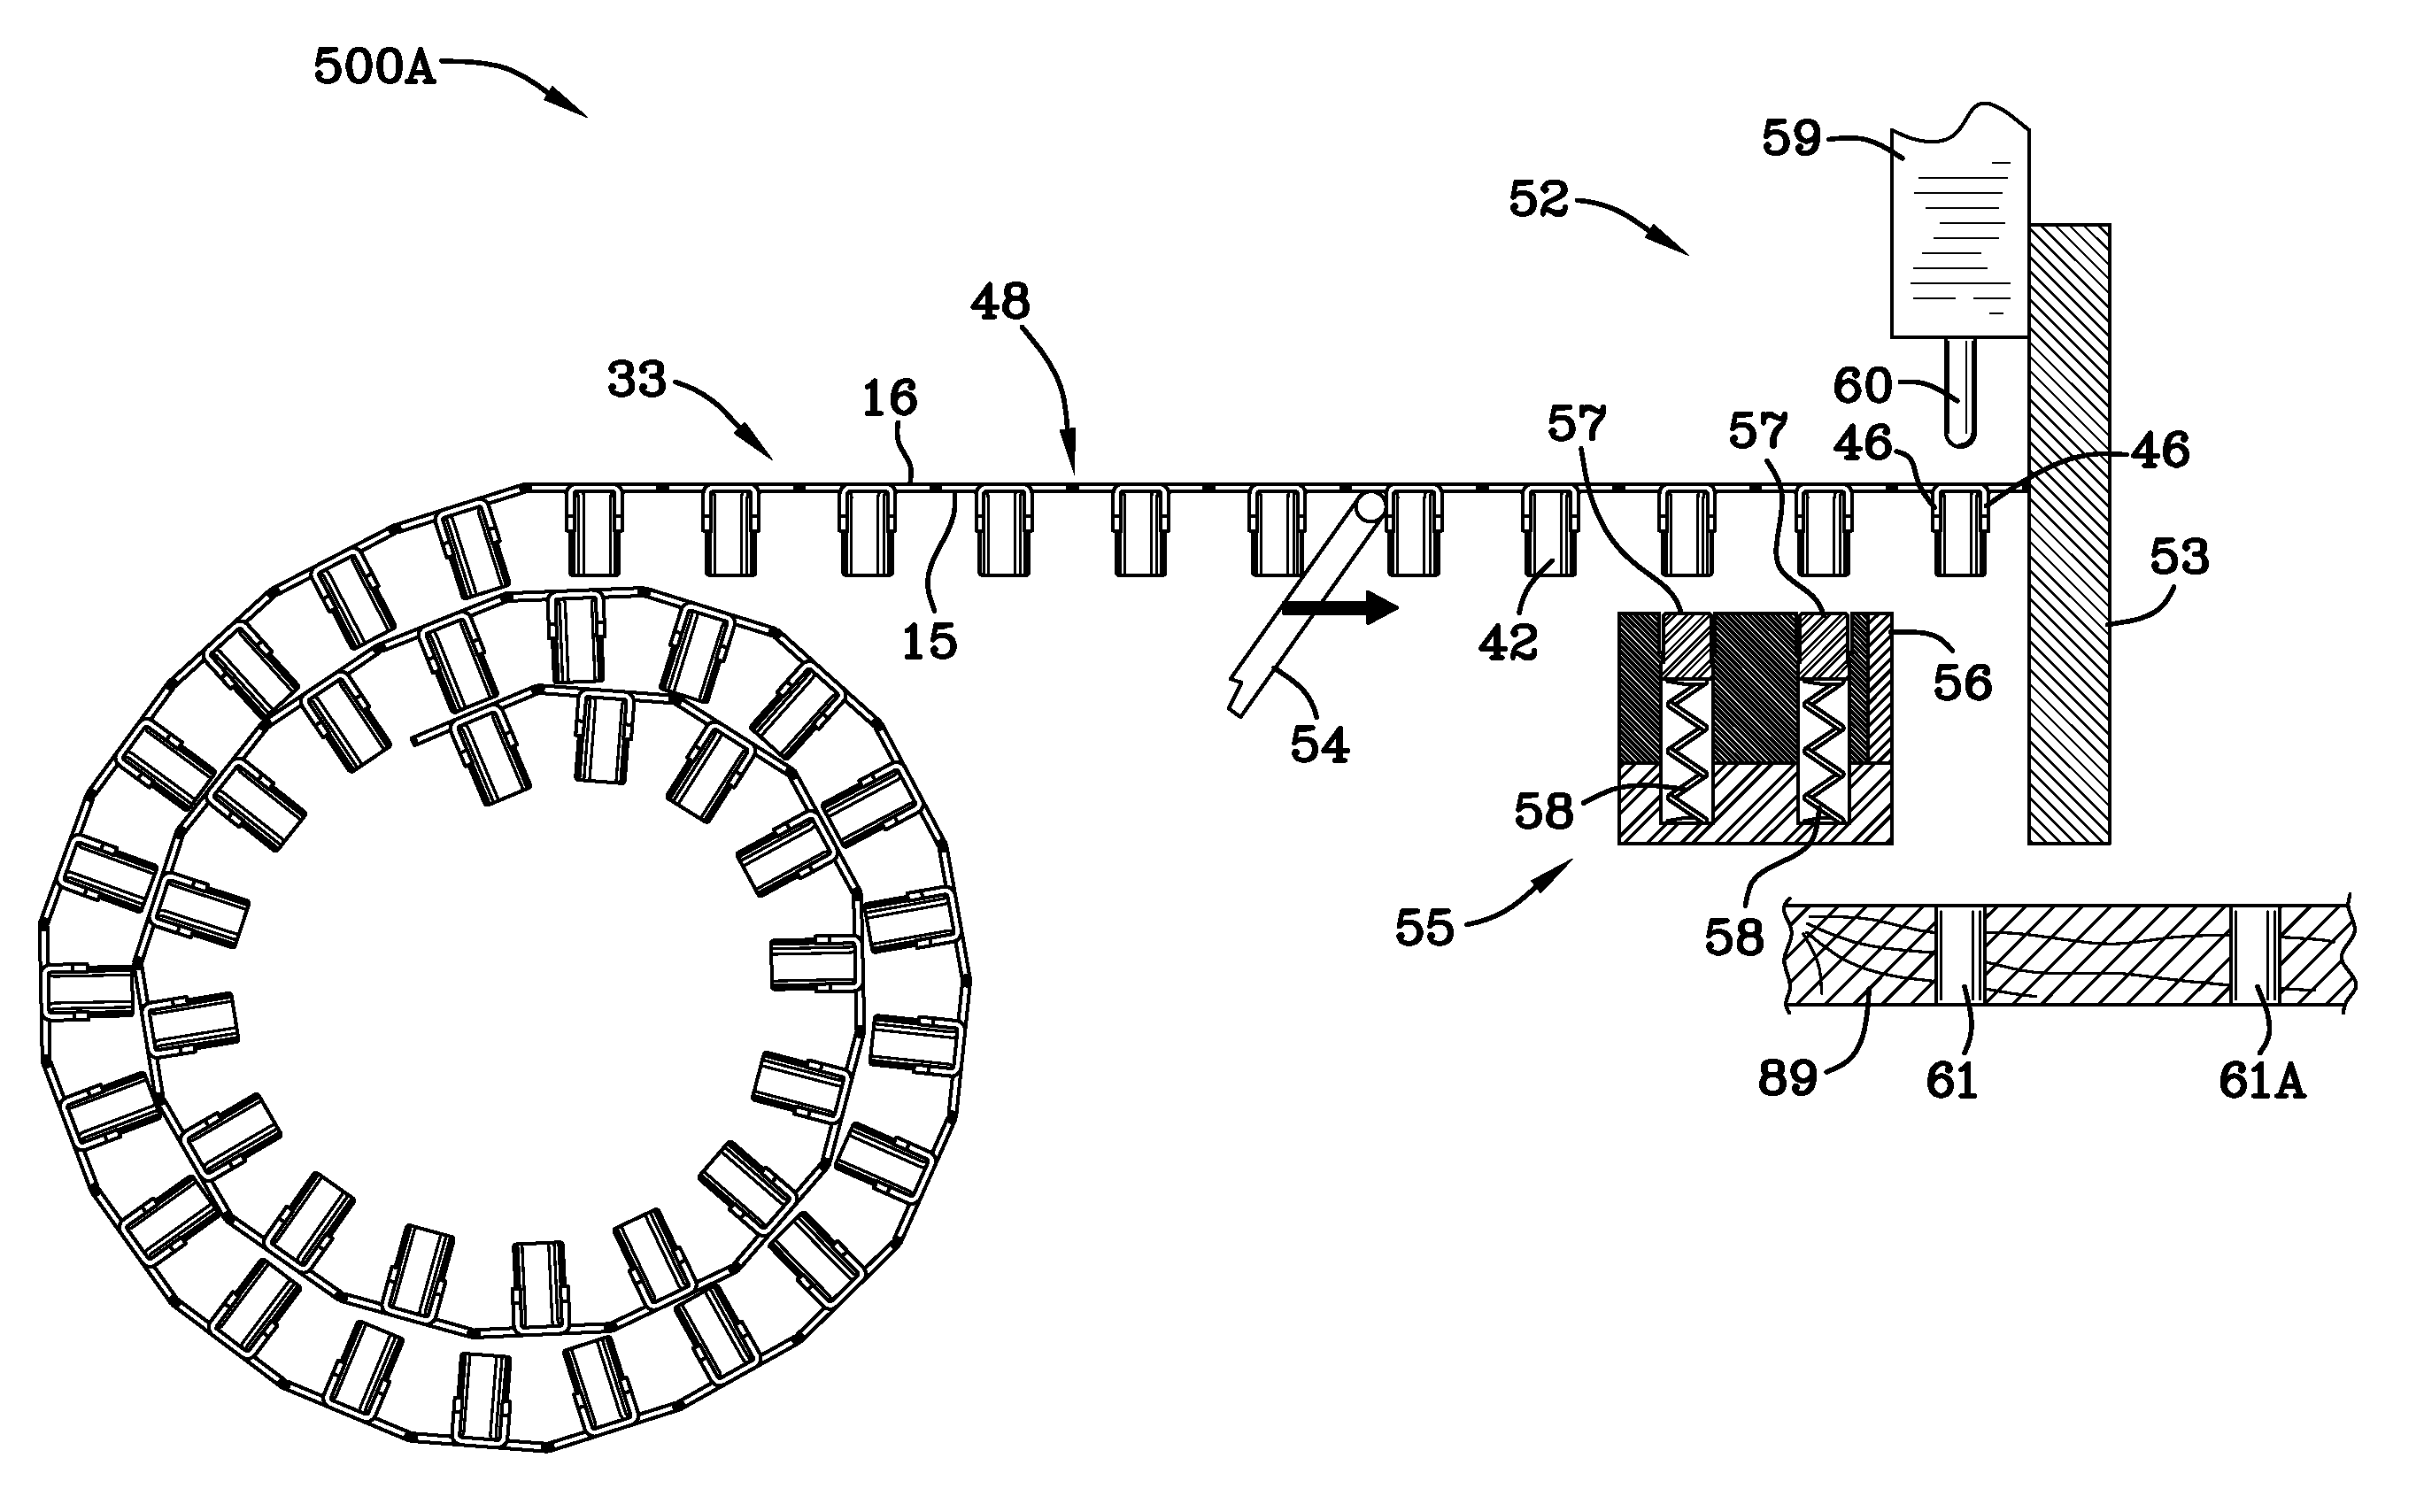 Apparatus and method for severing and inserting collated t-nuts